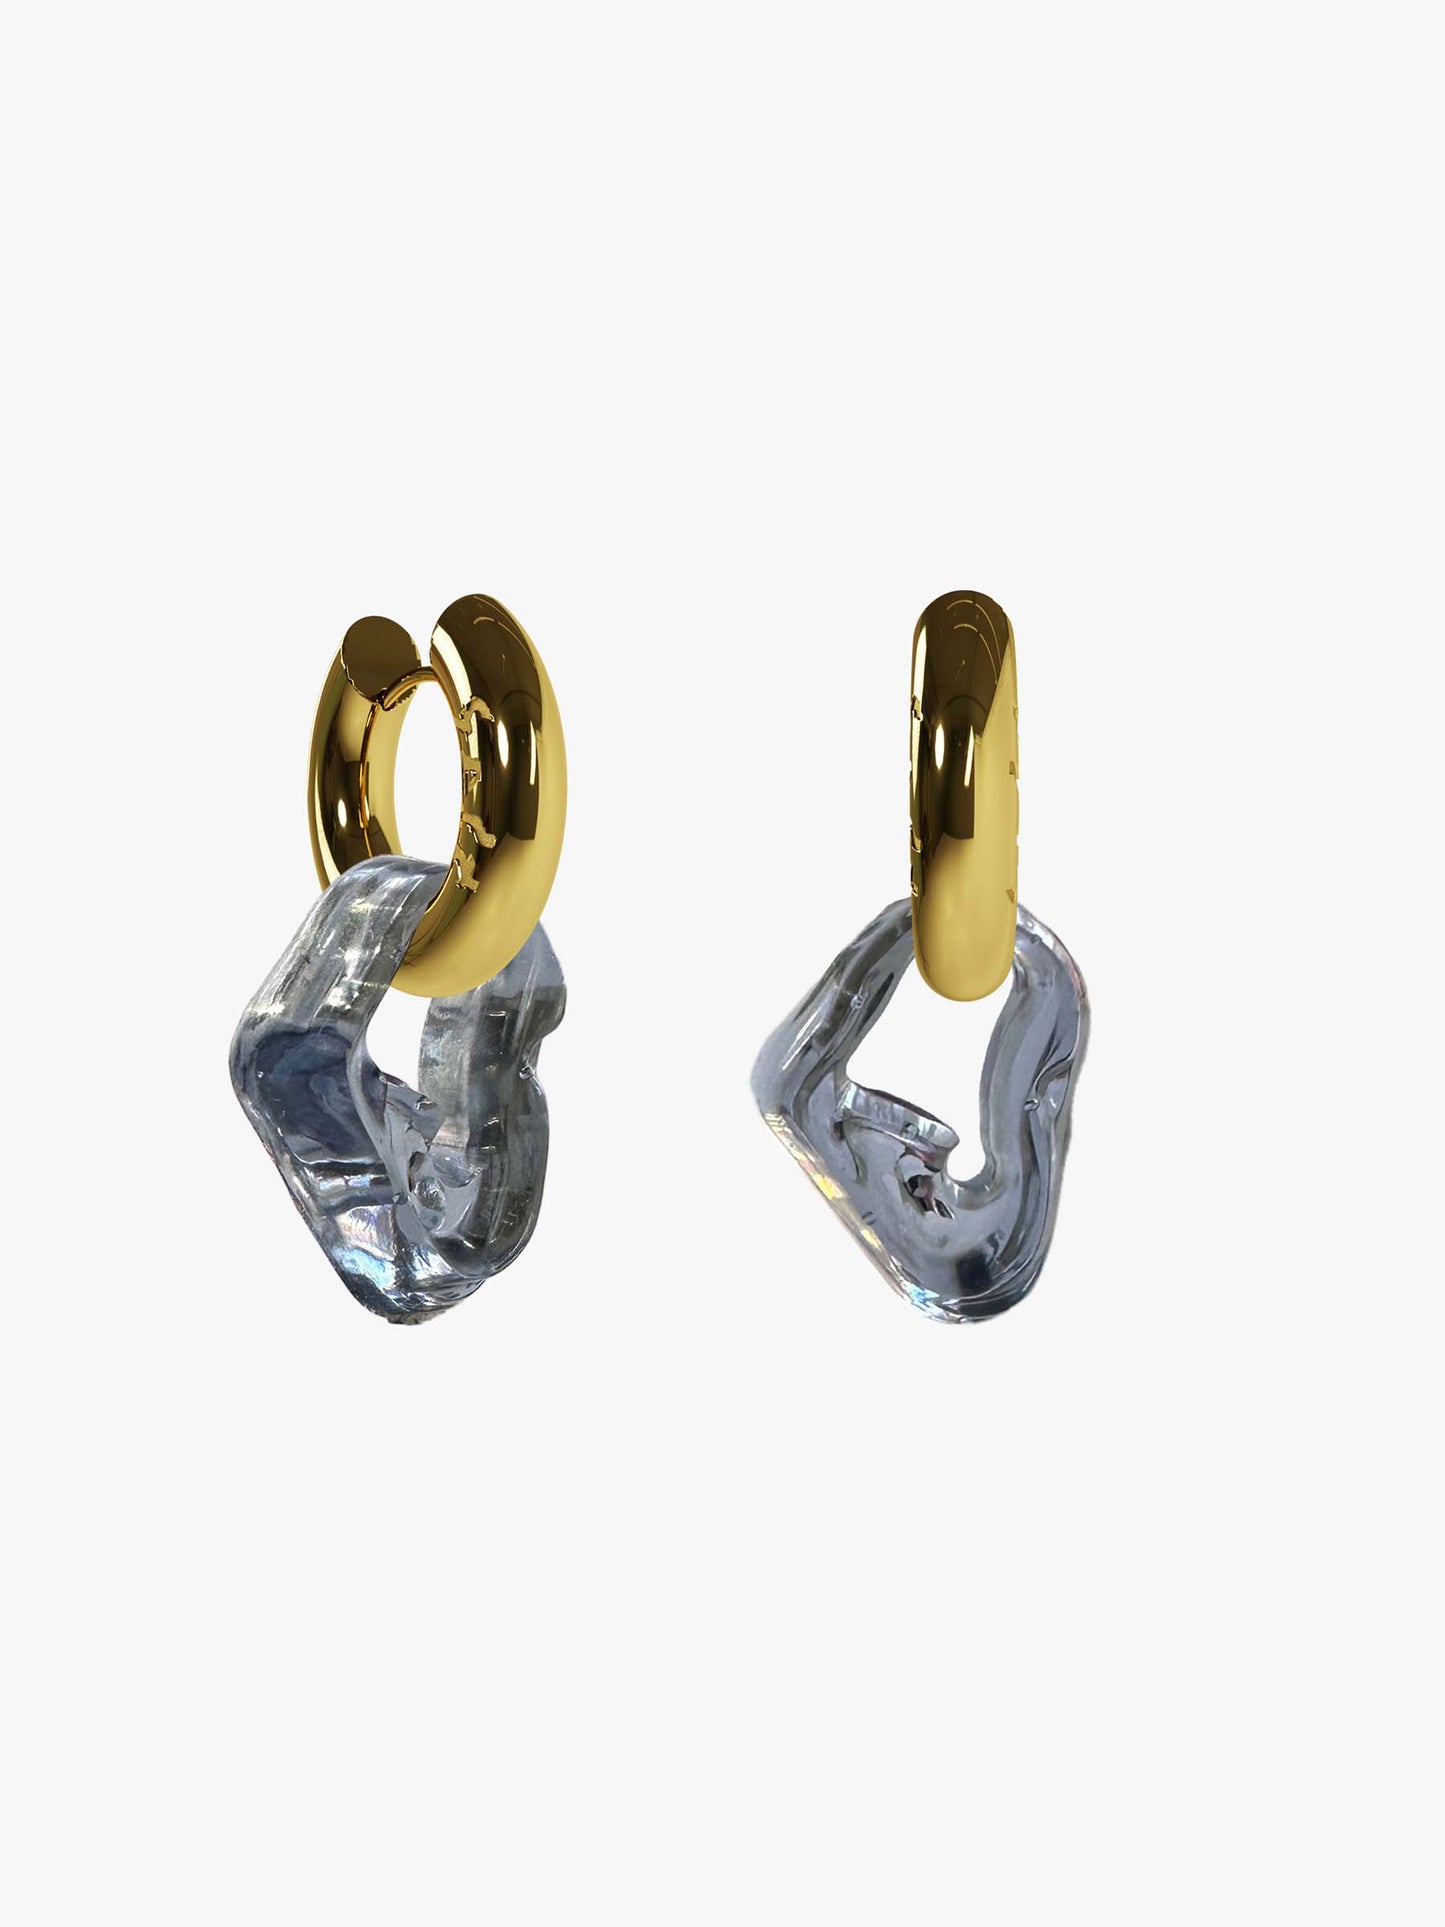 Bia grey glass gold earring (pair)